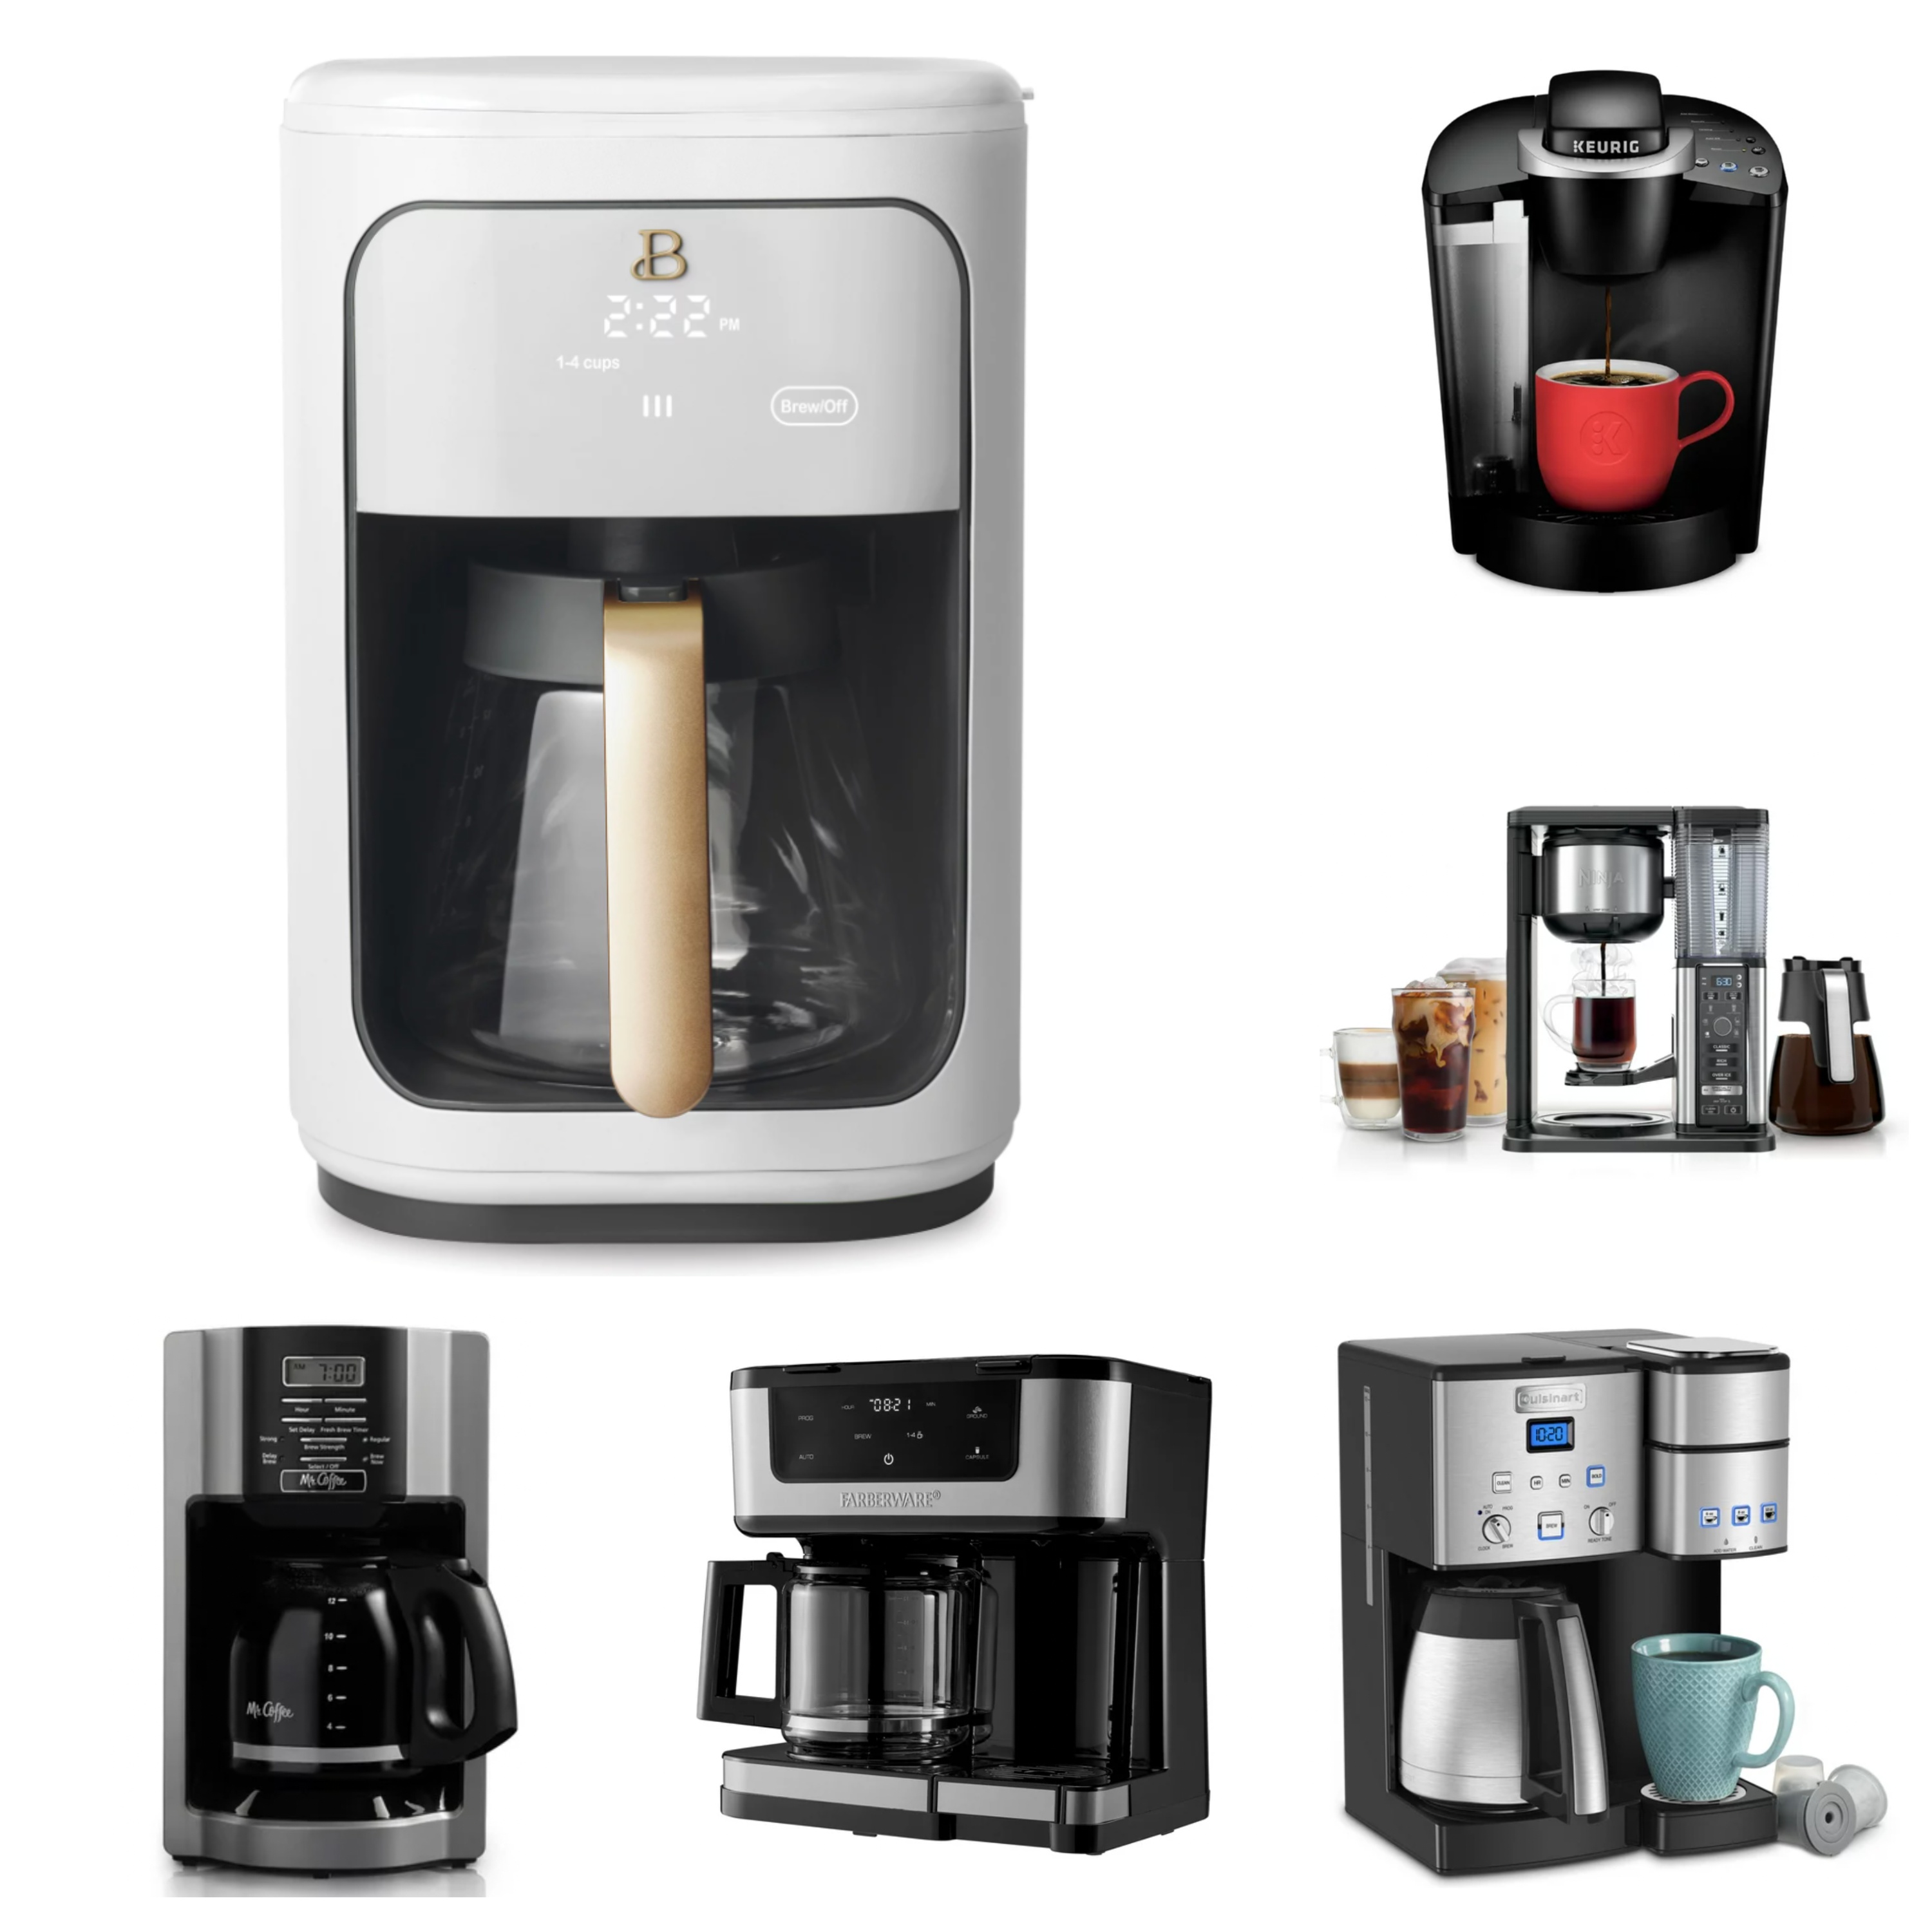  Beautiful 14 Cup Programmable Touchscreen Coffee Maker, White  Icing by Drew Barrymore (White Icing): Home & Kitchen